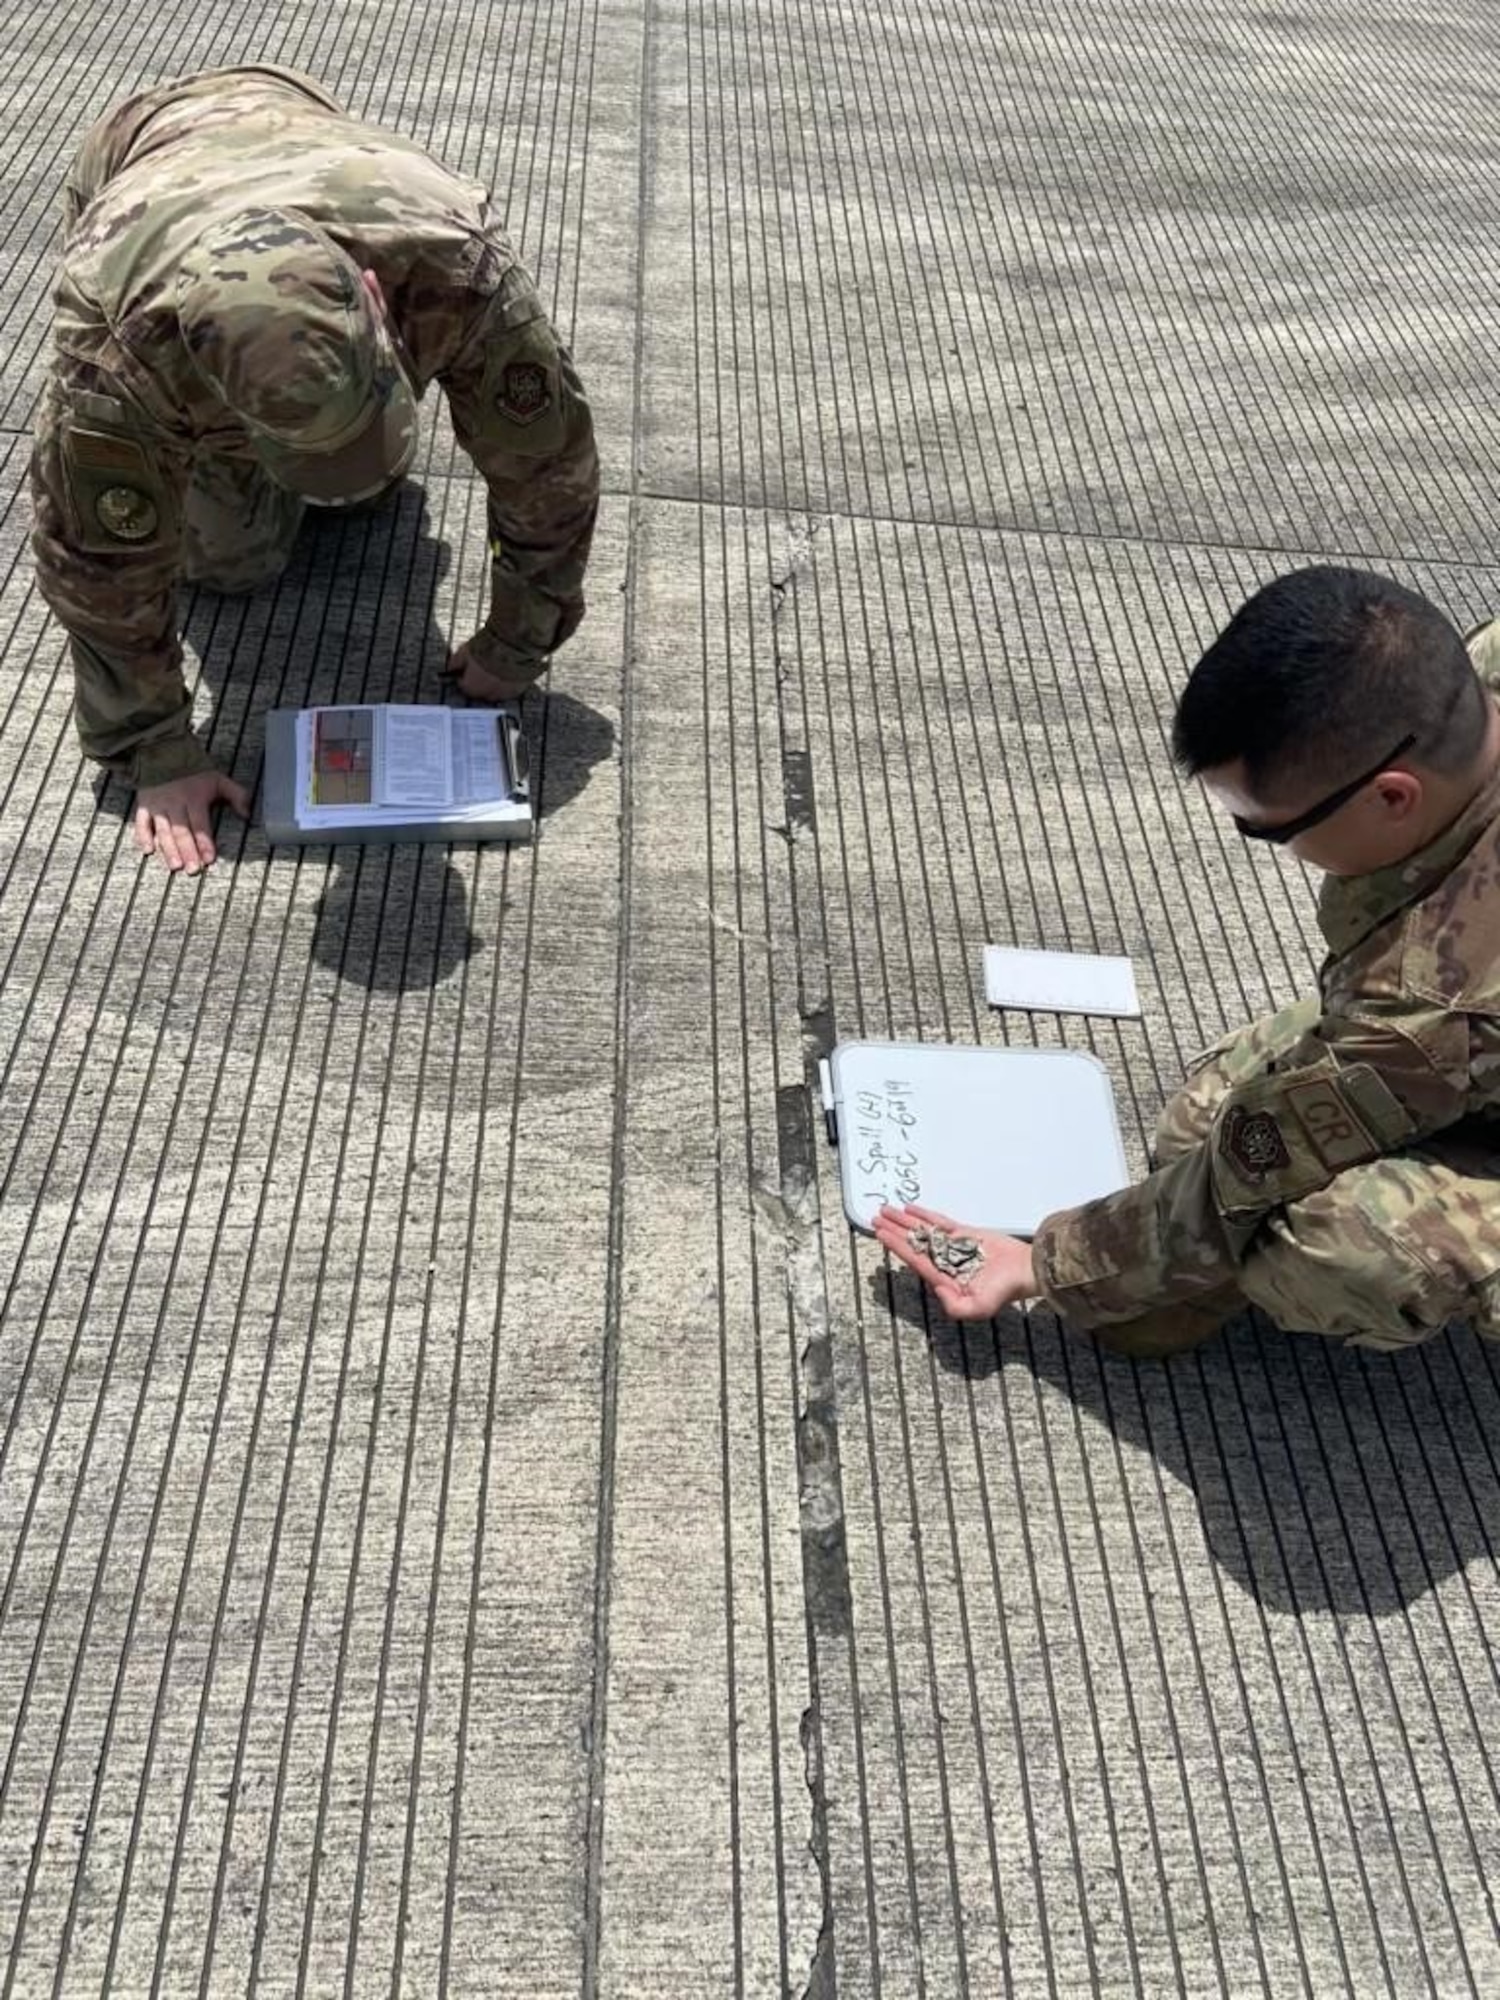 Tech. Sgt. Christopher Anderson, left, 621st Contingency Response Support Squadron engineering assistant, and Capt. Glenn Grecia, right, 621st Contingency Response Squadron civil engineer, inspect pavement distress to calculate the pavement condition index at Houma-Terrebonne Airport, Louisiana, July 11, 2020. The pavement condition index determines where it is safe to operate medium and heavy load aircraft. (U.S. Air Force photo by Tech. Sgt. Luther Mitchell Jr)